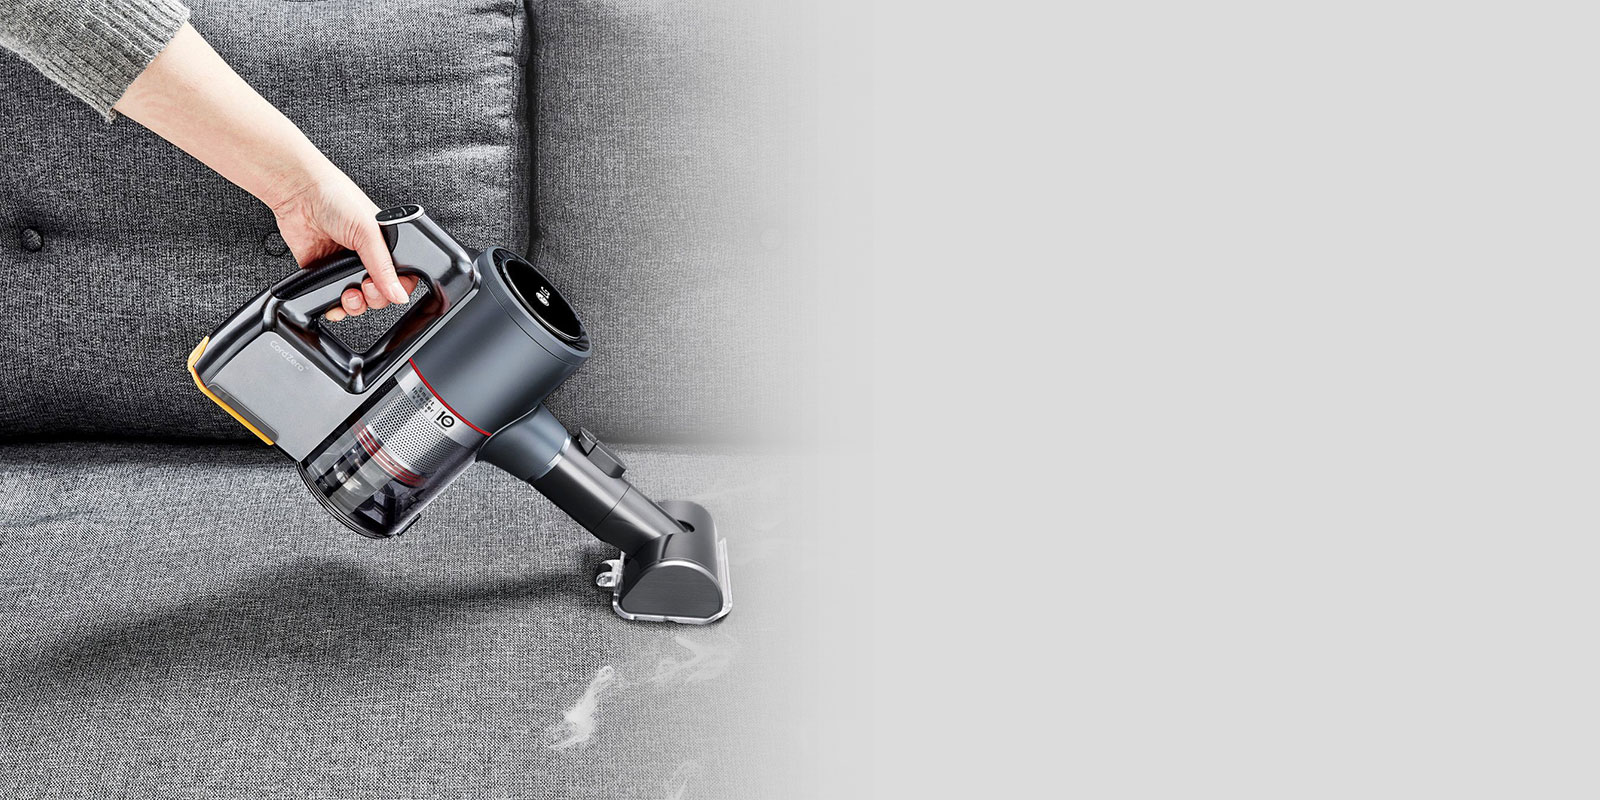 Using Power Punch nozzle as handheld vacuum to vacuum couch